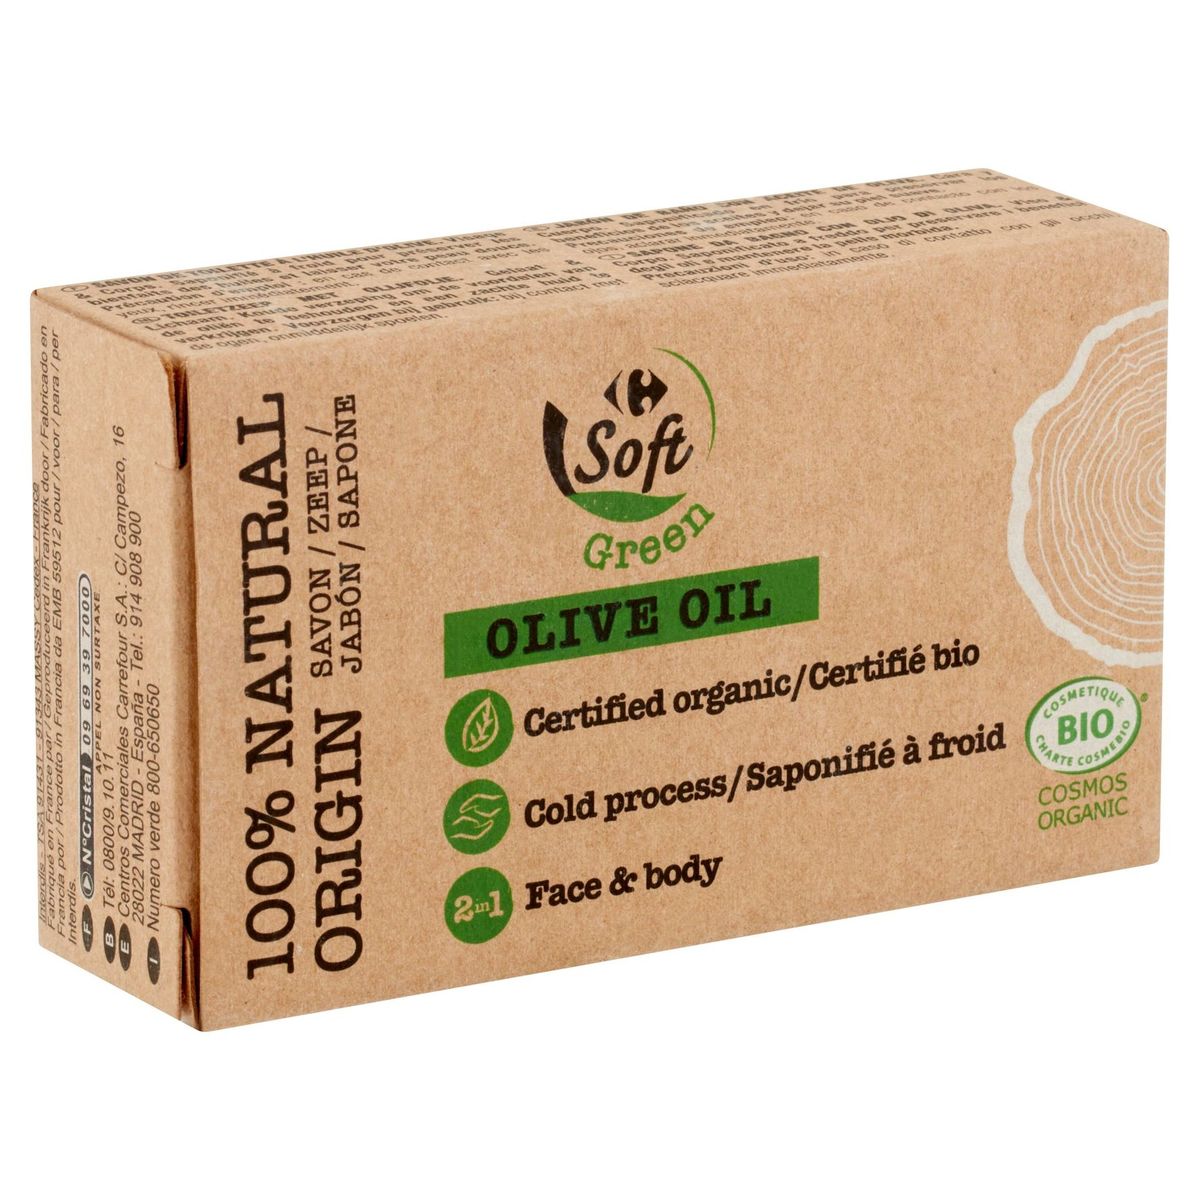 Carrefour Soft Green Olive Oil 2in1 Face & Body Zeep 100 g